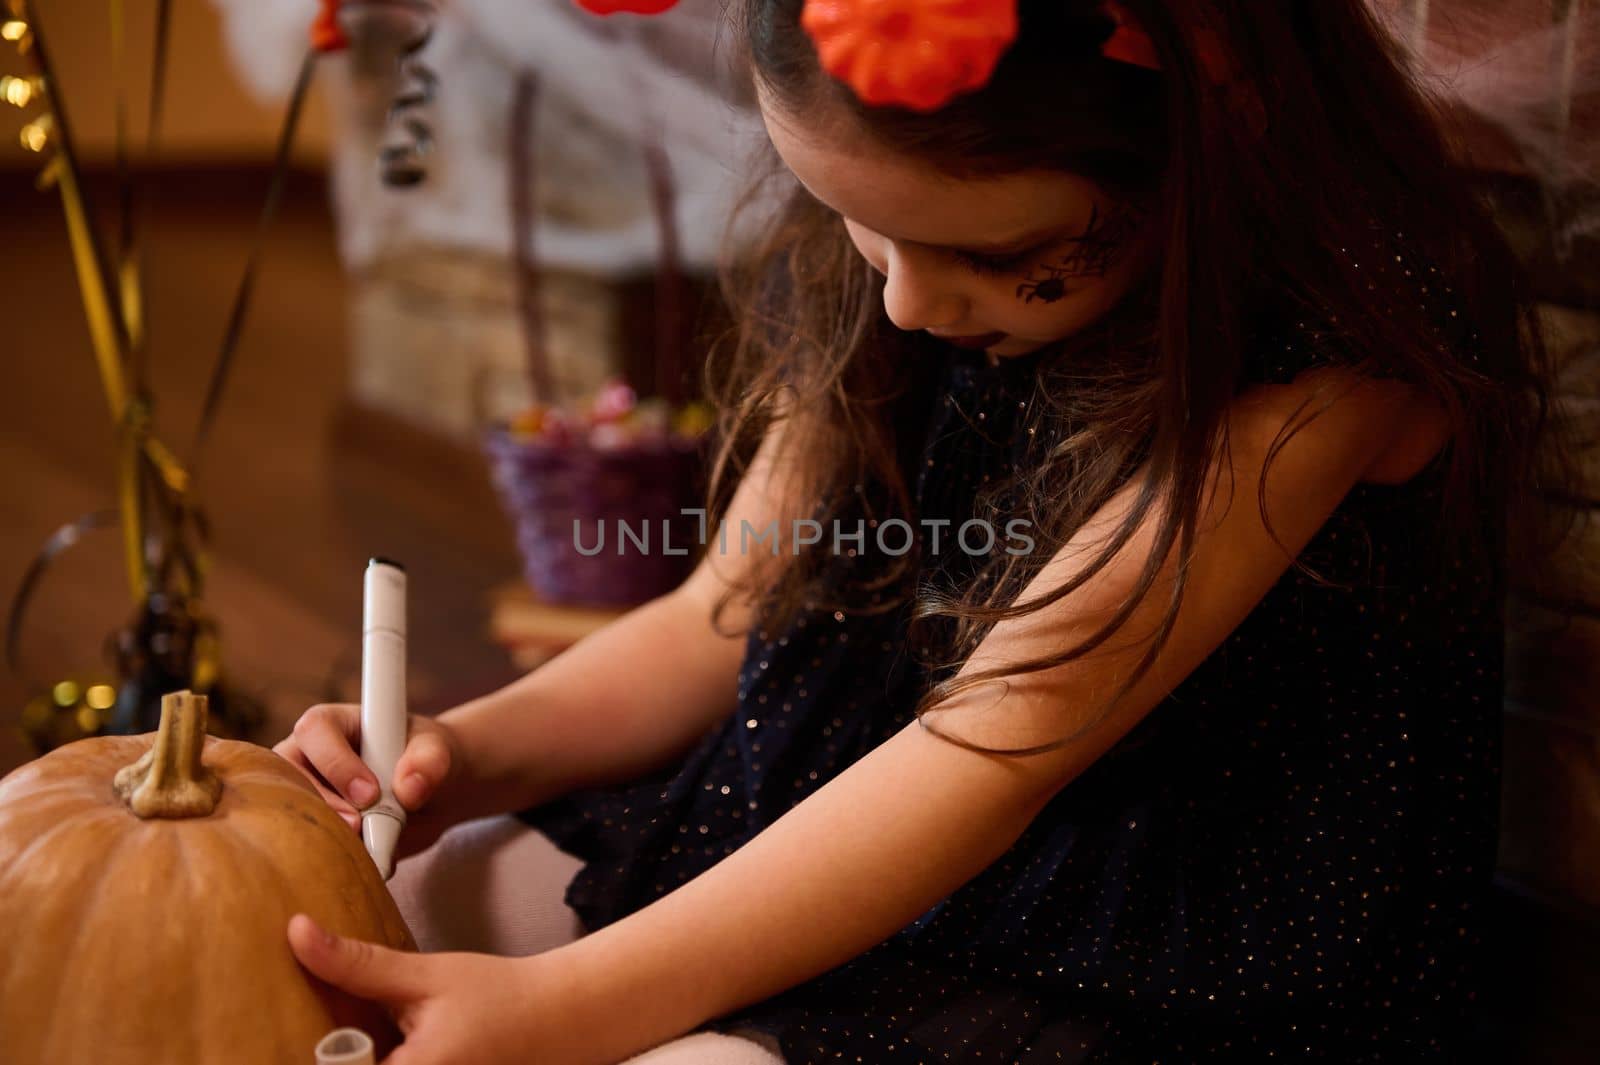 Selective focus on a little girl looking like an enchantress, sitting on the floor surrounded by Halloween treats against a cobweb covered fireplace, holding a pumkin and drawing a Halloween Jack